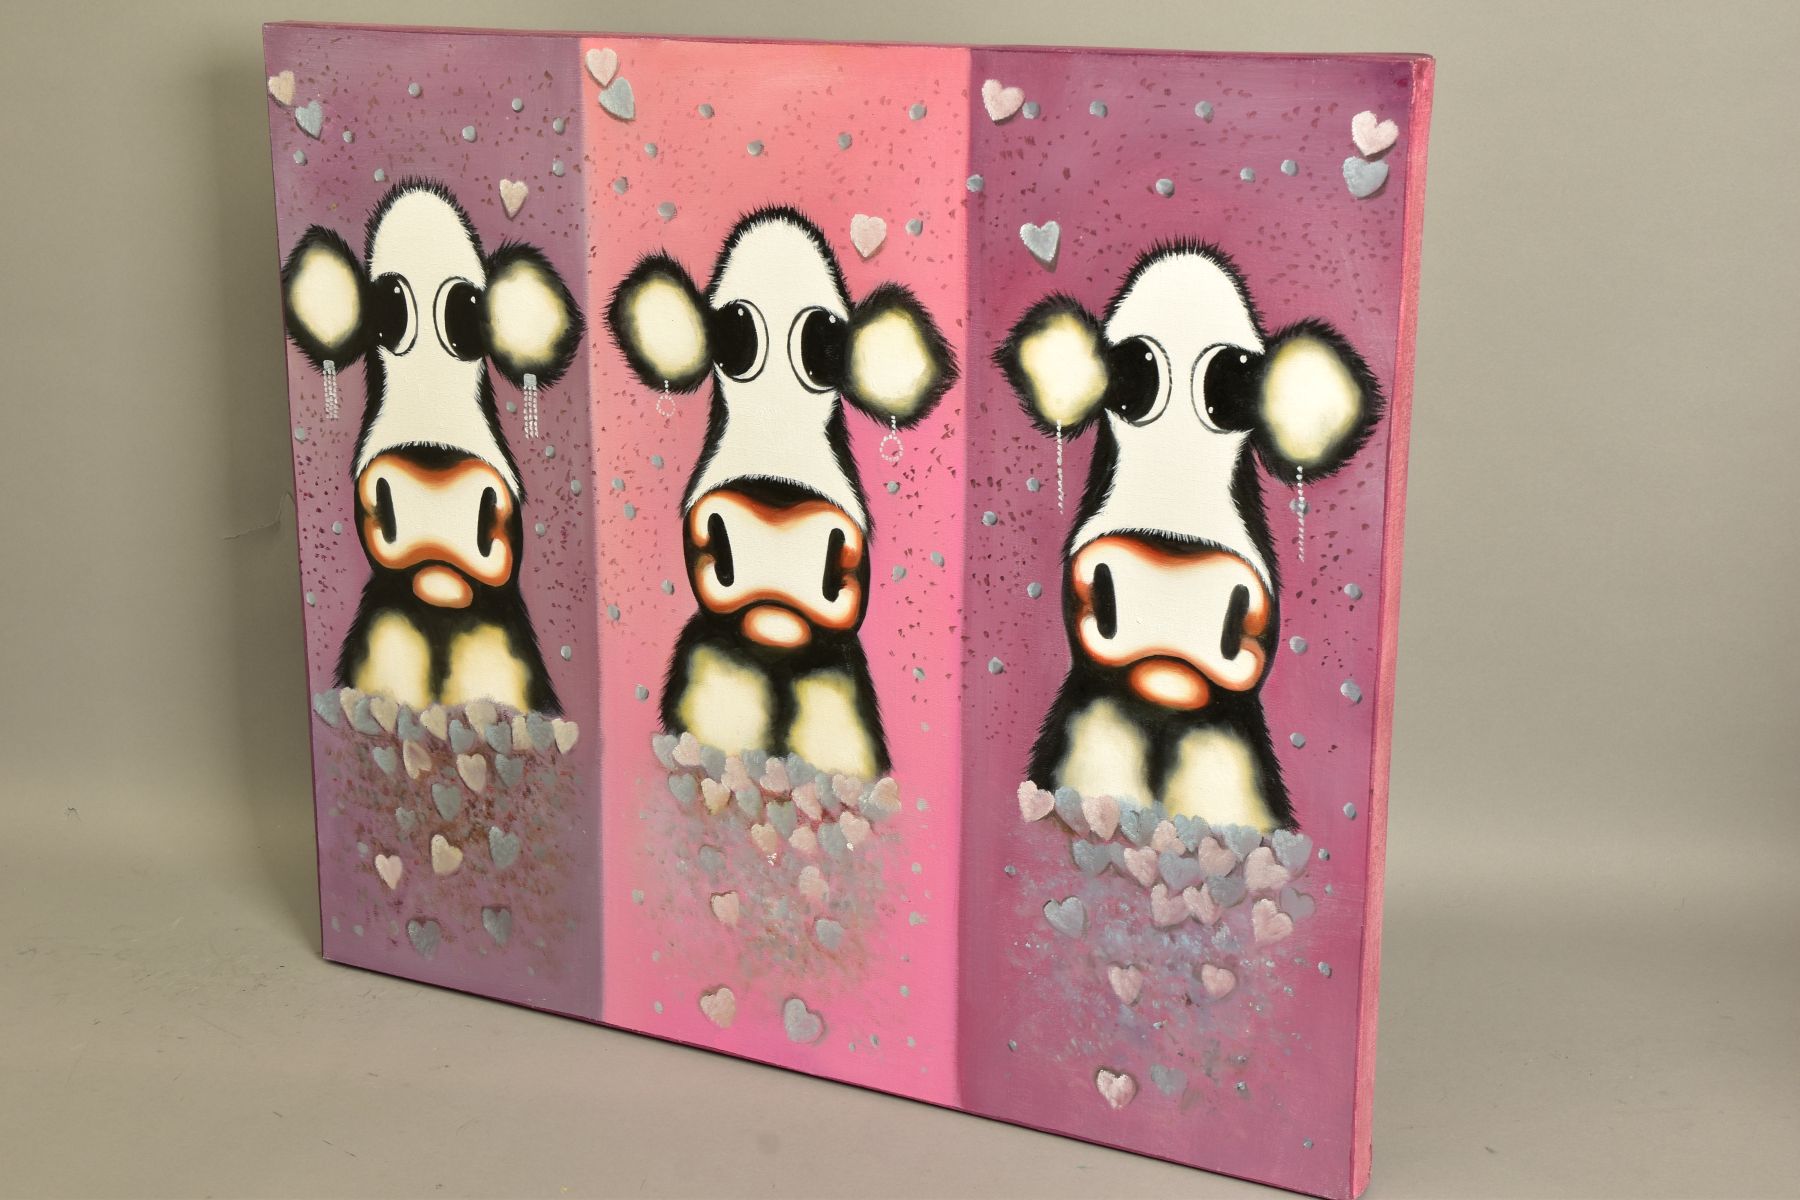 IN THE STYLE OF CAROLINE SHOTTON (BRITISH 1973) three quirky cows wearing earrings, unsigned, oil on - Image 4 of 7